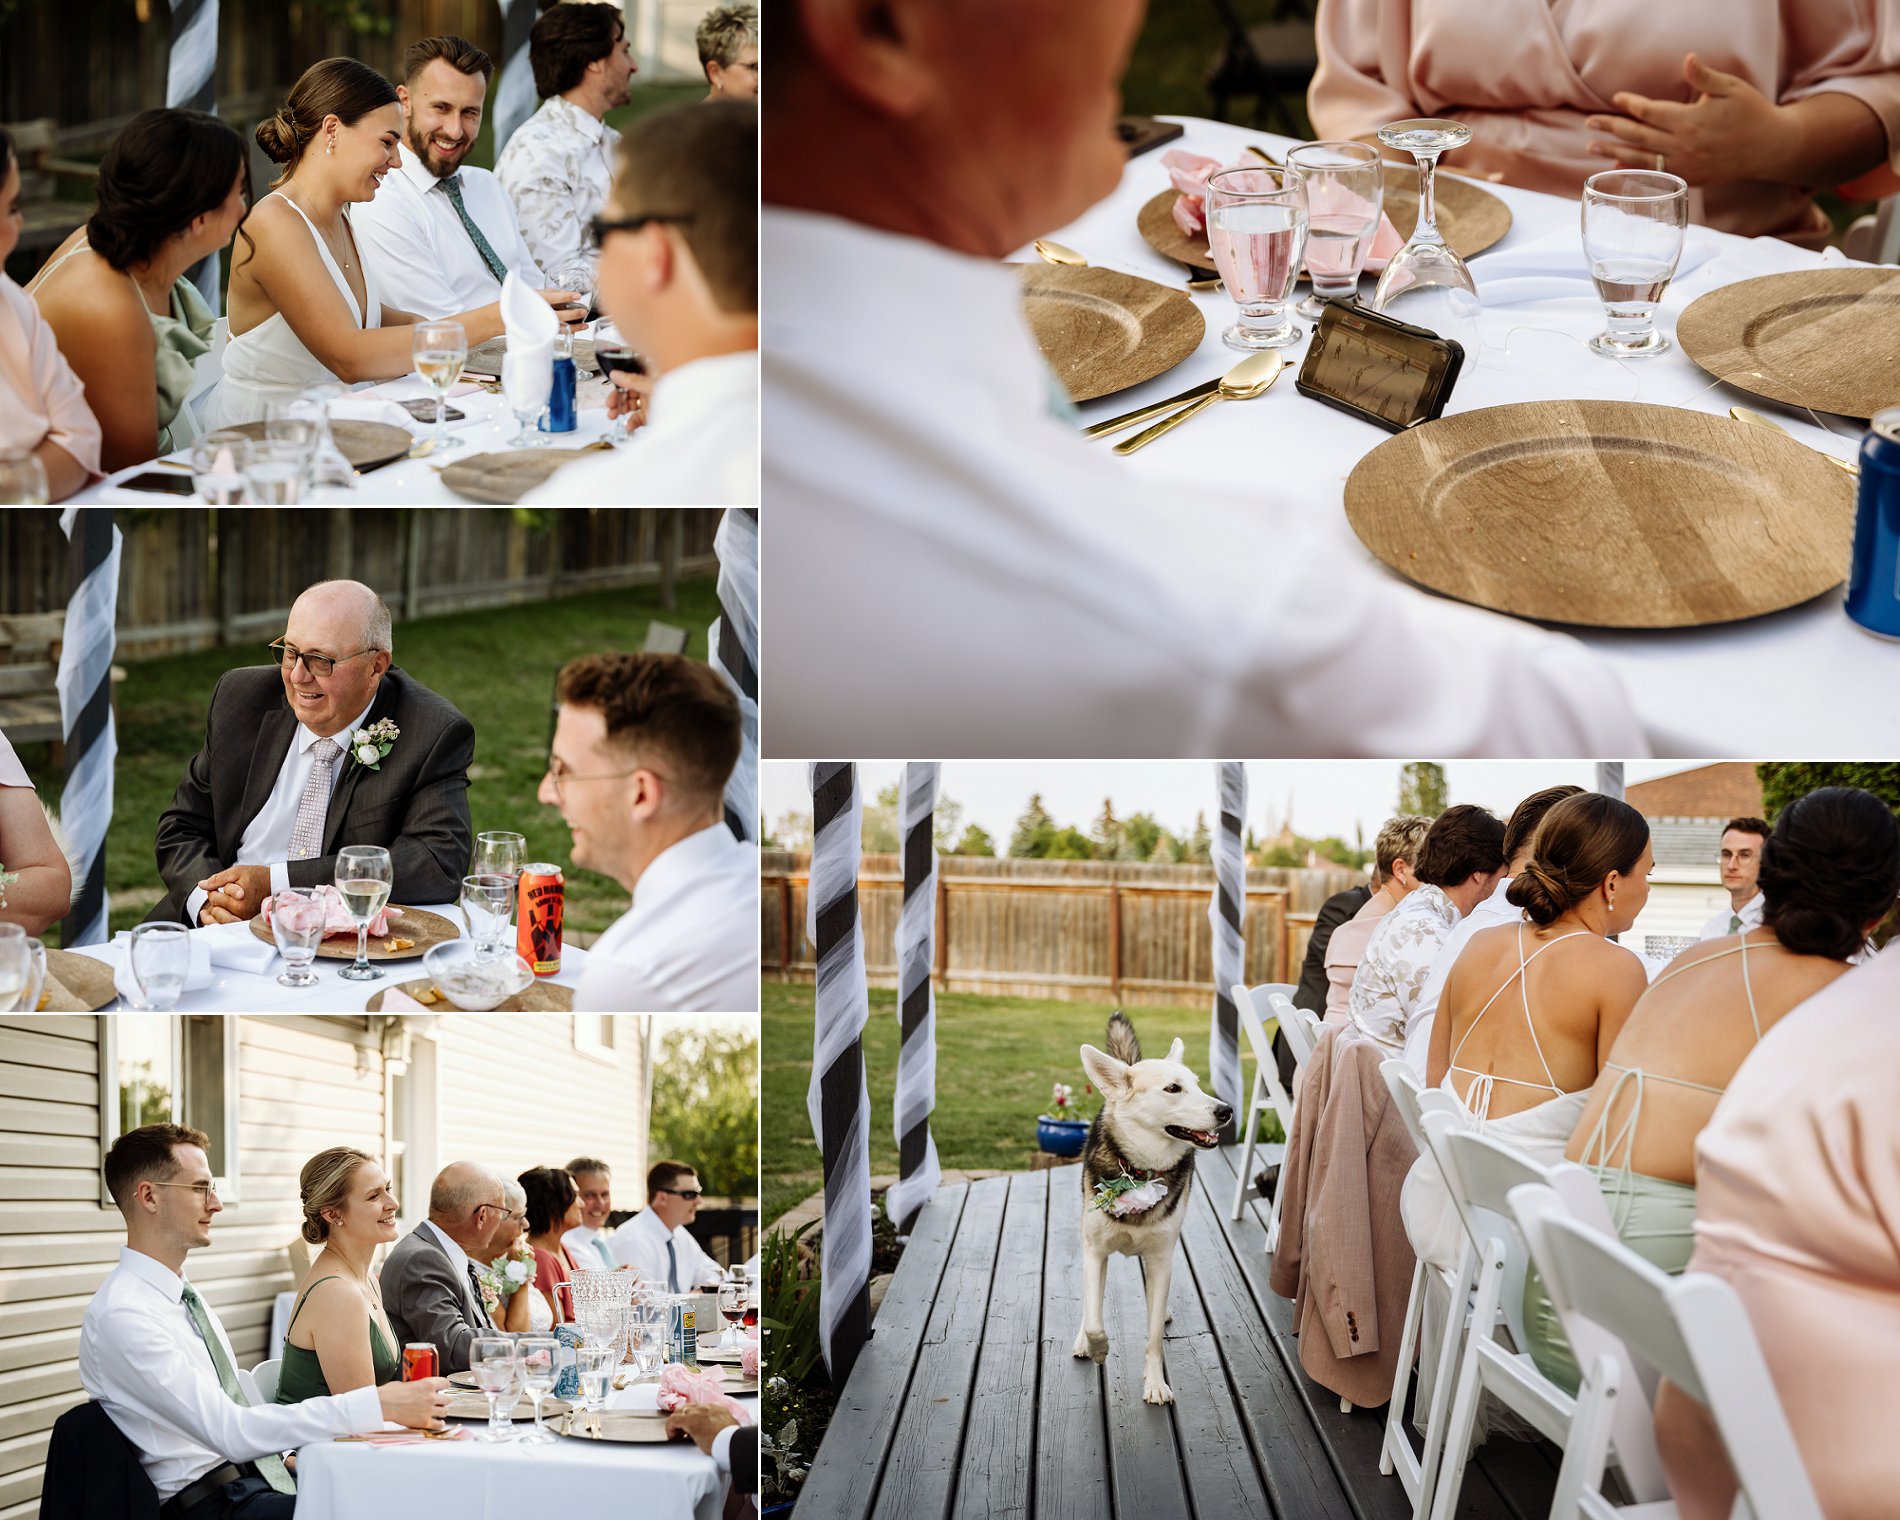 Families share a meal outside at a backyard wedding reception.